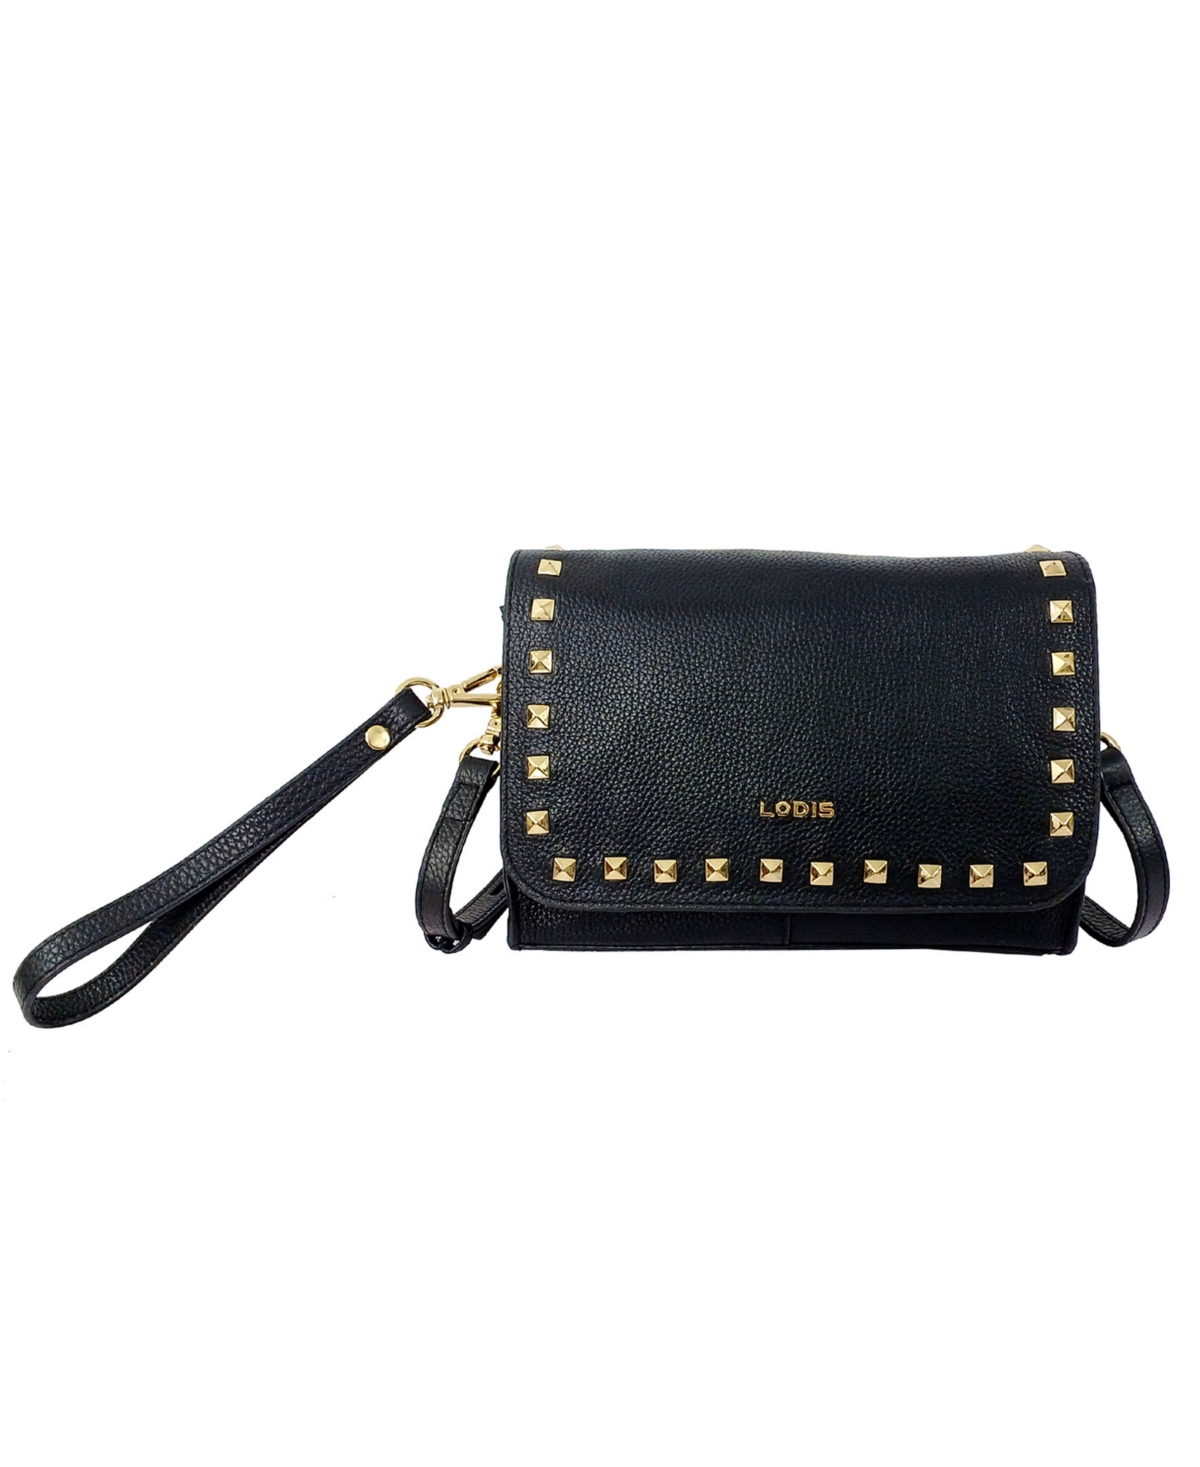 Lodis Rio Adjustable Crossbody Bag With Studs In Black